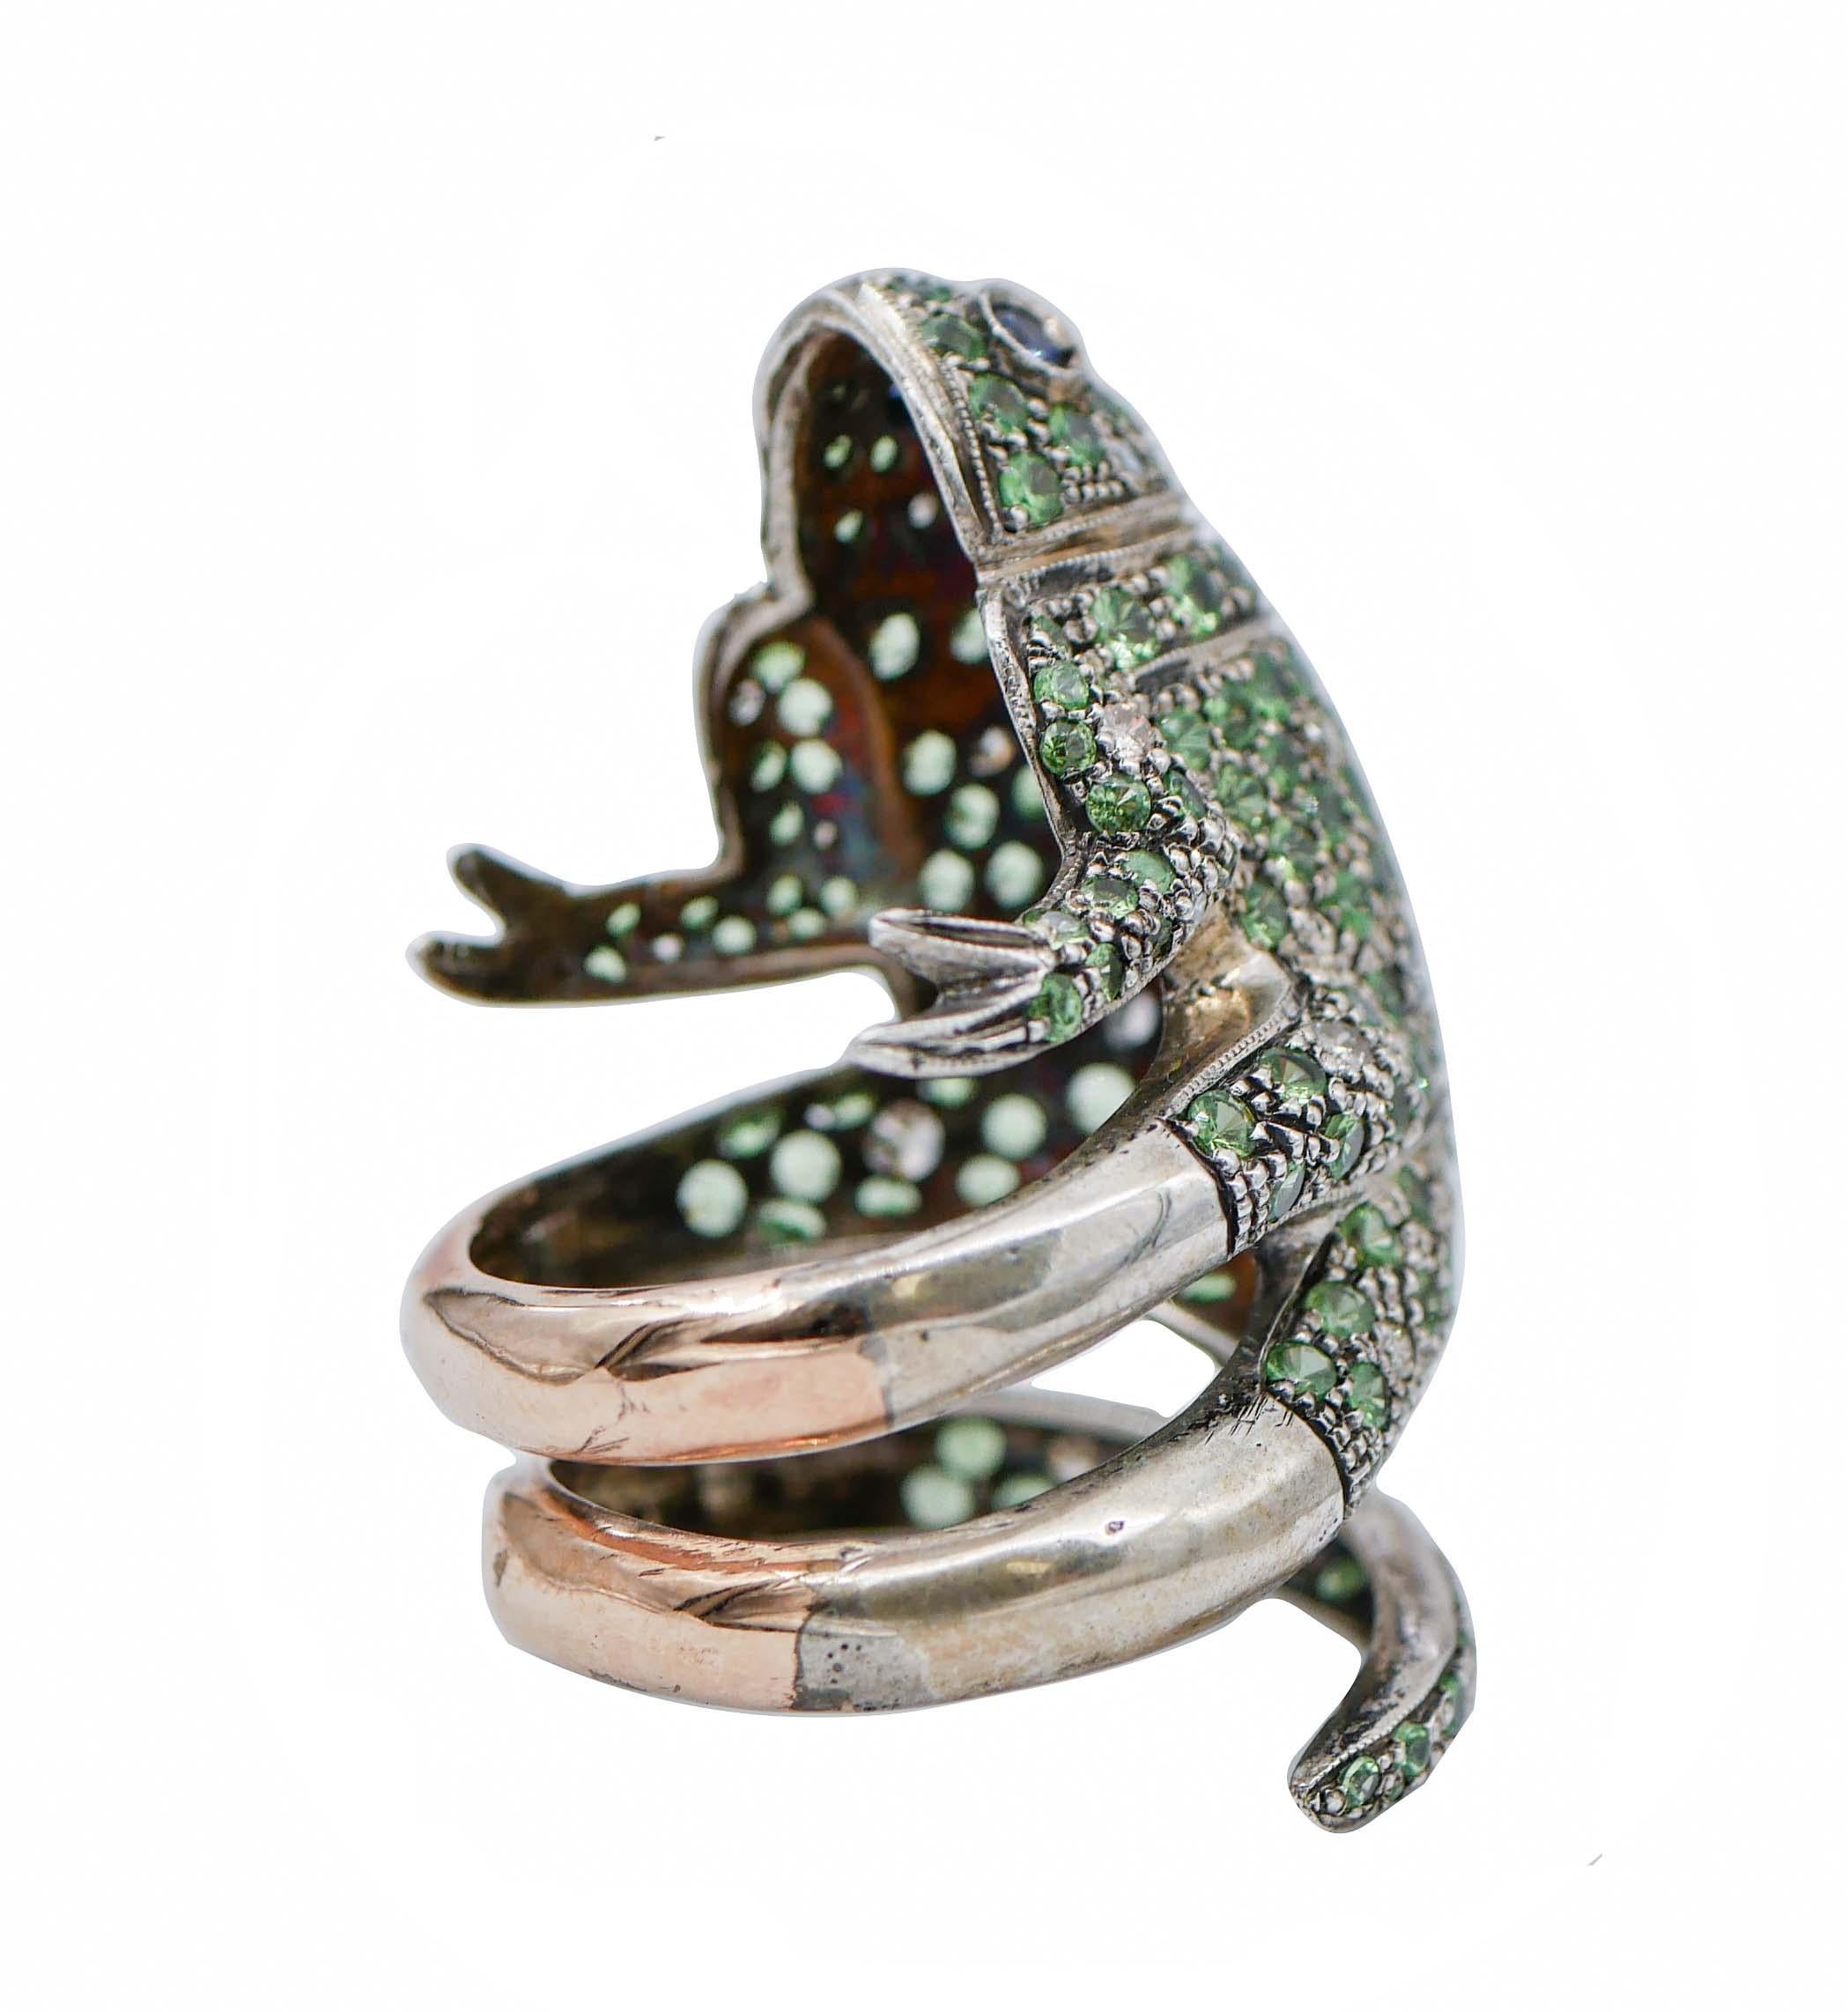 Mixed Cut Tsavorite, Sapphires, Diamonds, Rose Gold and Silver Chameleon Ring